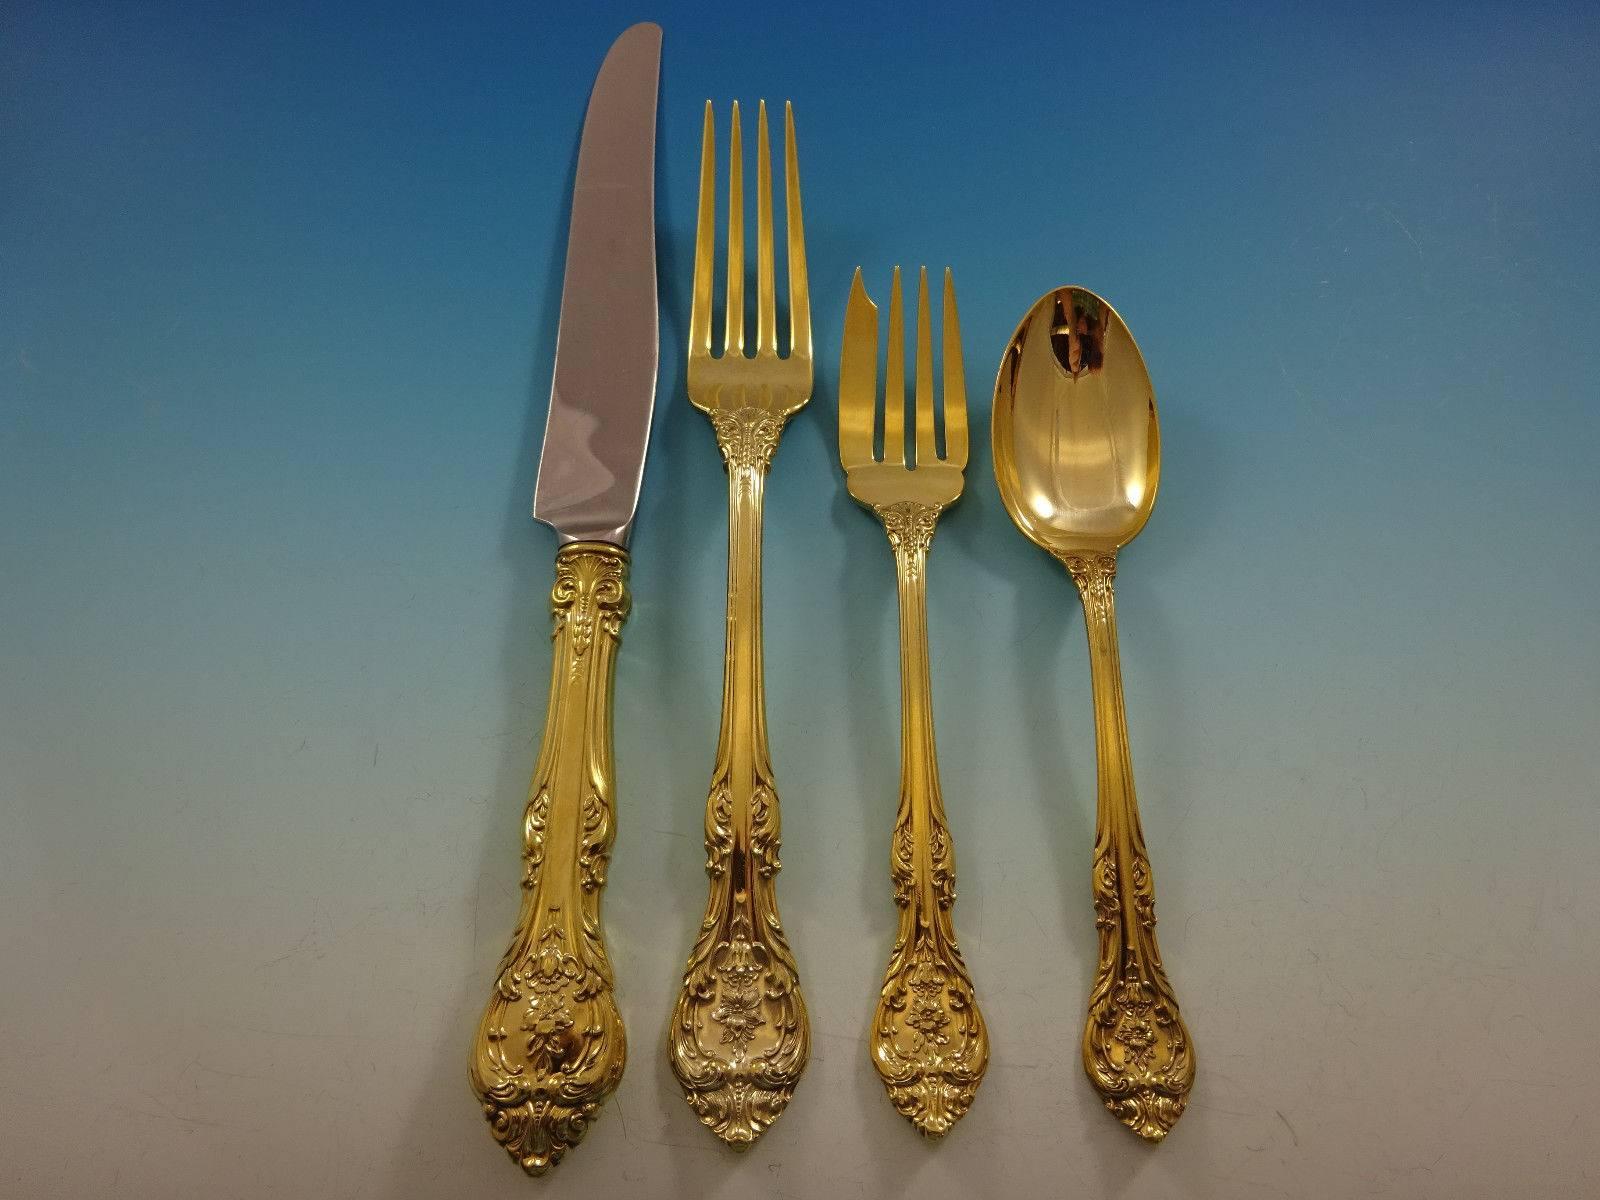 King Edward by Gorham sterling silver flatware service Vermeil -
Completely gold-washed set of 34 pieces. This set includes: 

Eight dinner size knives, 9 5/8